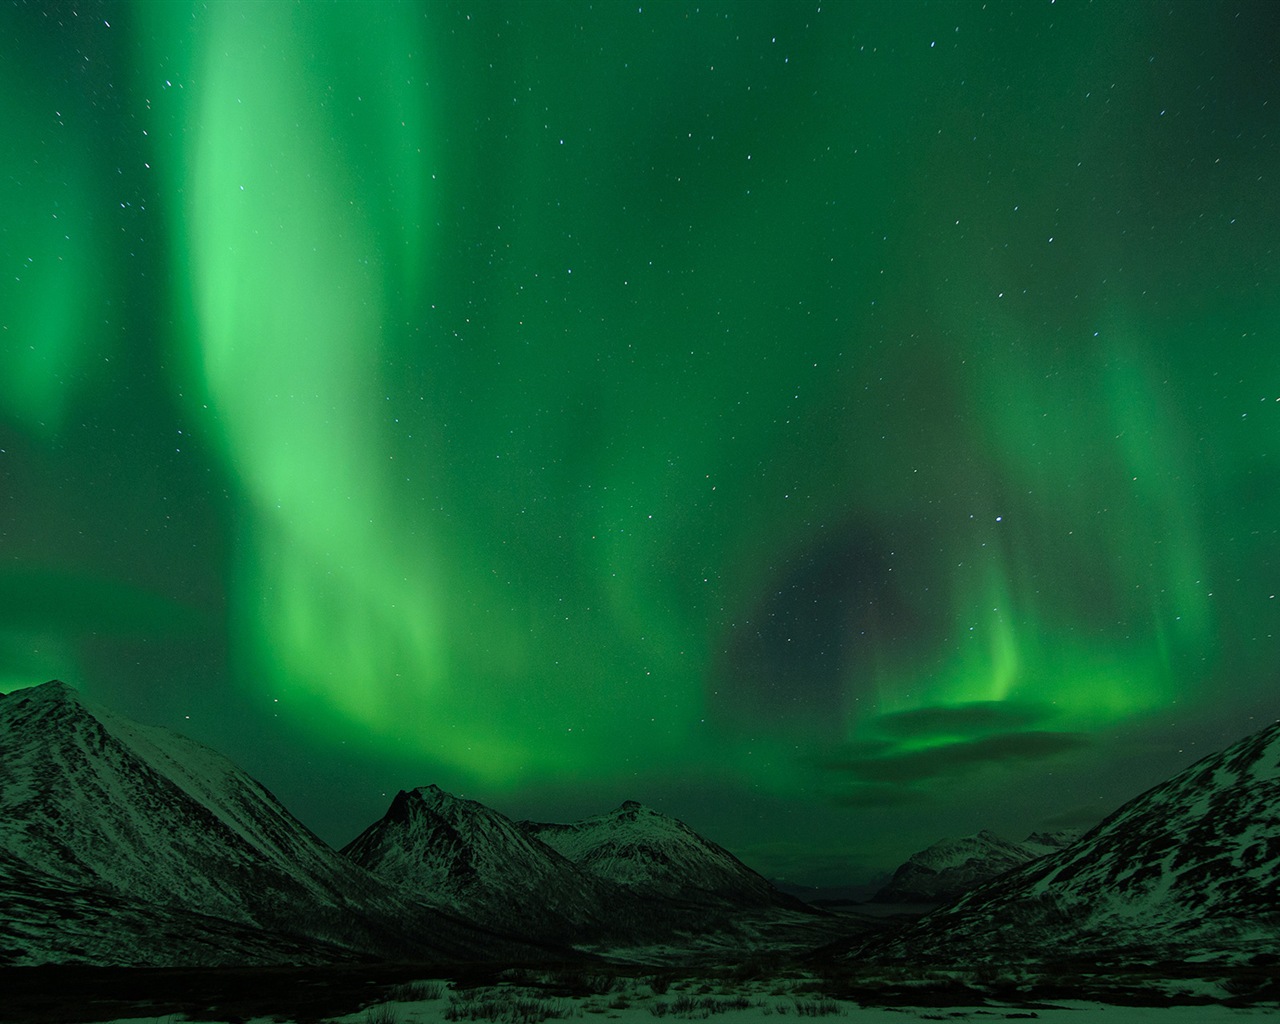 Natural wonders of the Northern Lights HD Wallpaper (1) #20 - 1280x1024